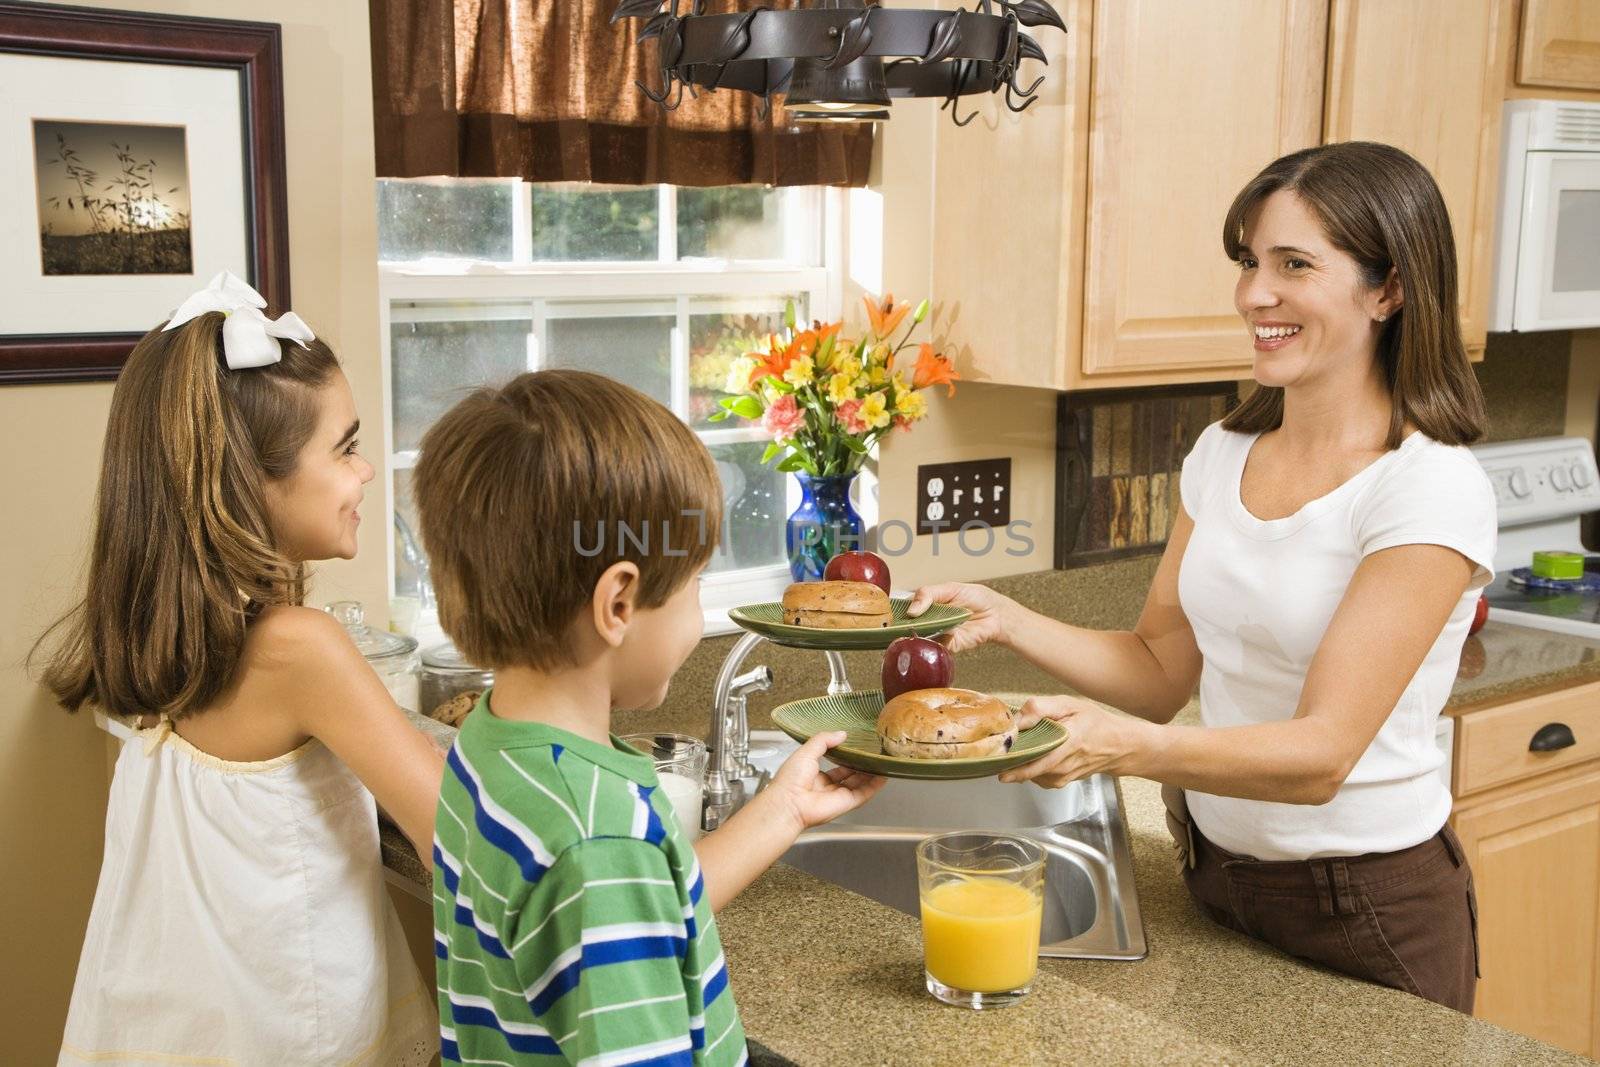 Hispanic mother giving healthy breakfast to young children in home kitchen.